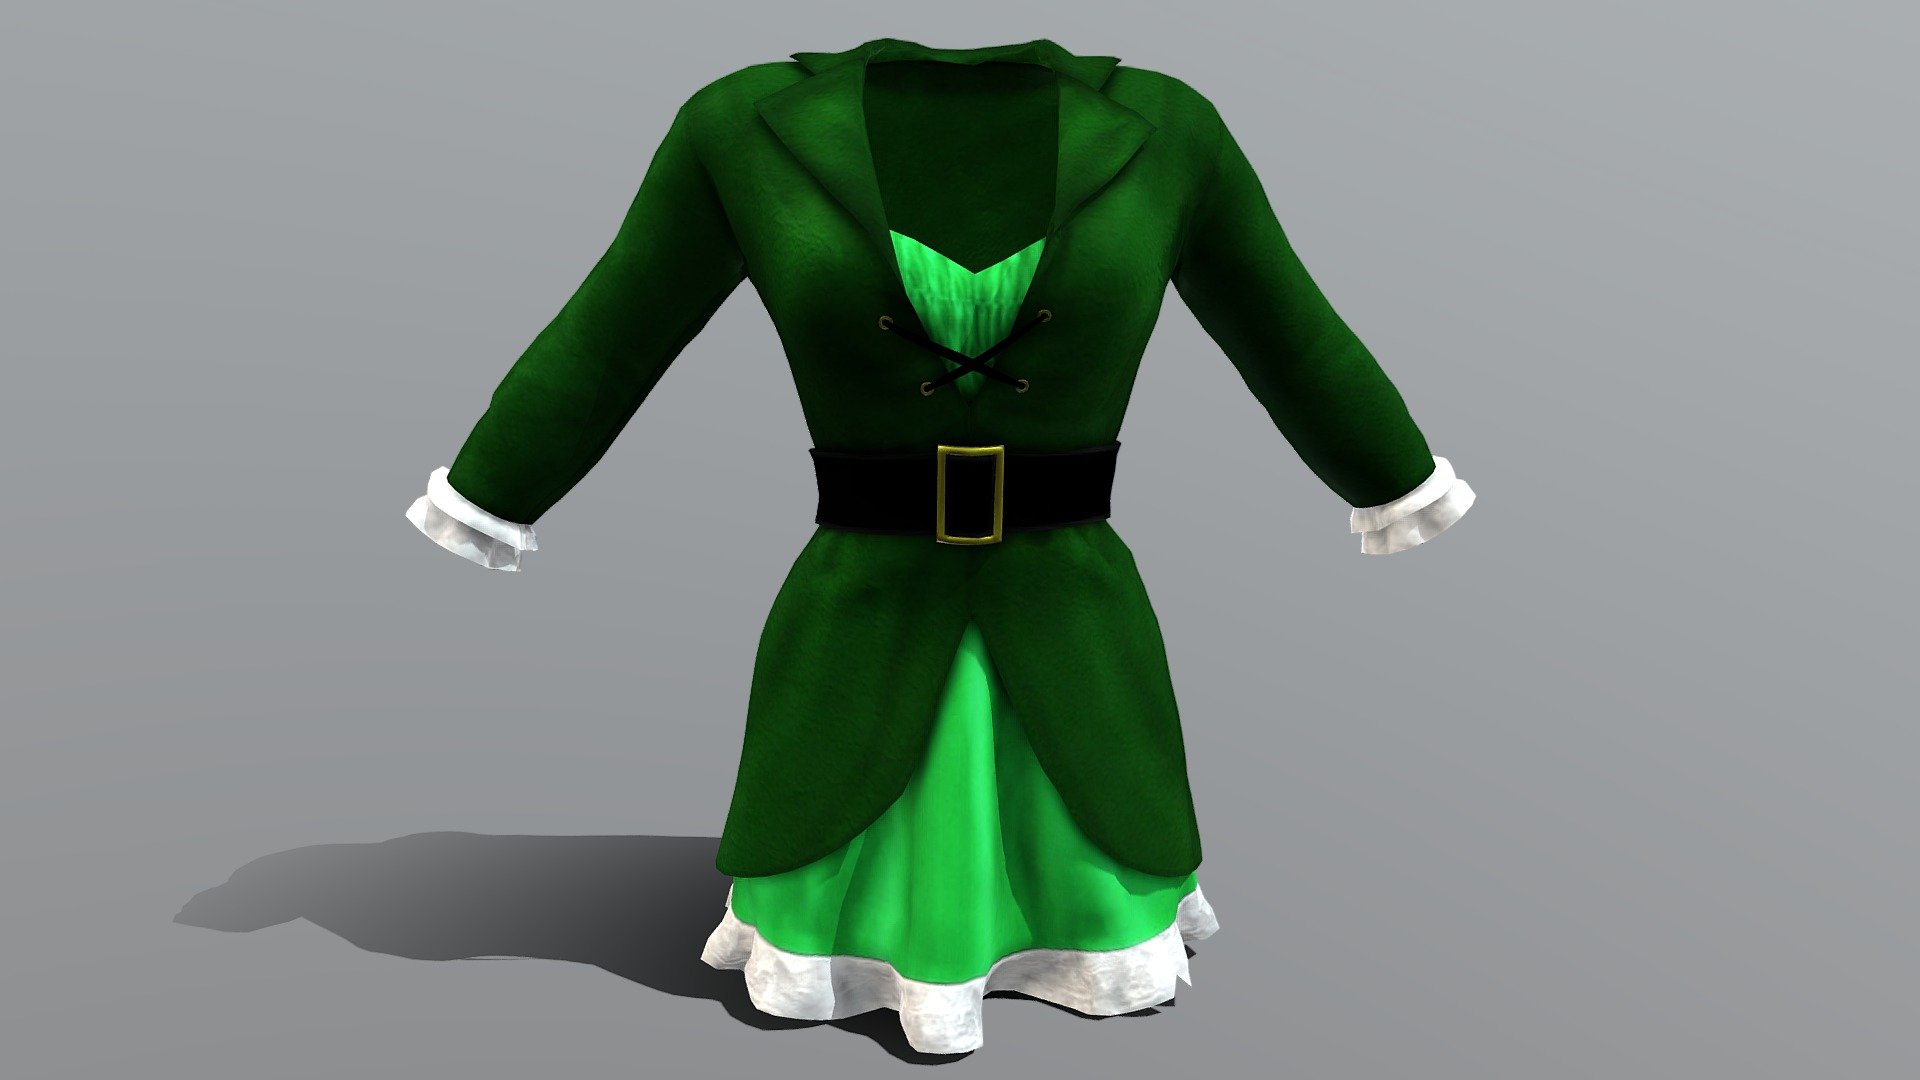 Jacket + Dress

Can be fitted to any characte

Clean topology

No overlapping smart optimum unwrapped UVs

High-quality realistic textures

FBX, OBJ, gITF, USDZ (request other formats)

PBR or Classic

Type     user:3dia &ldquo;search term